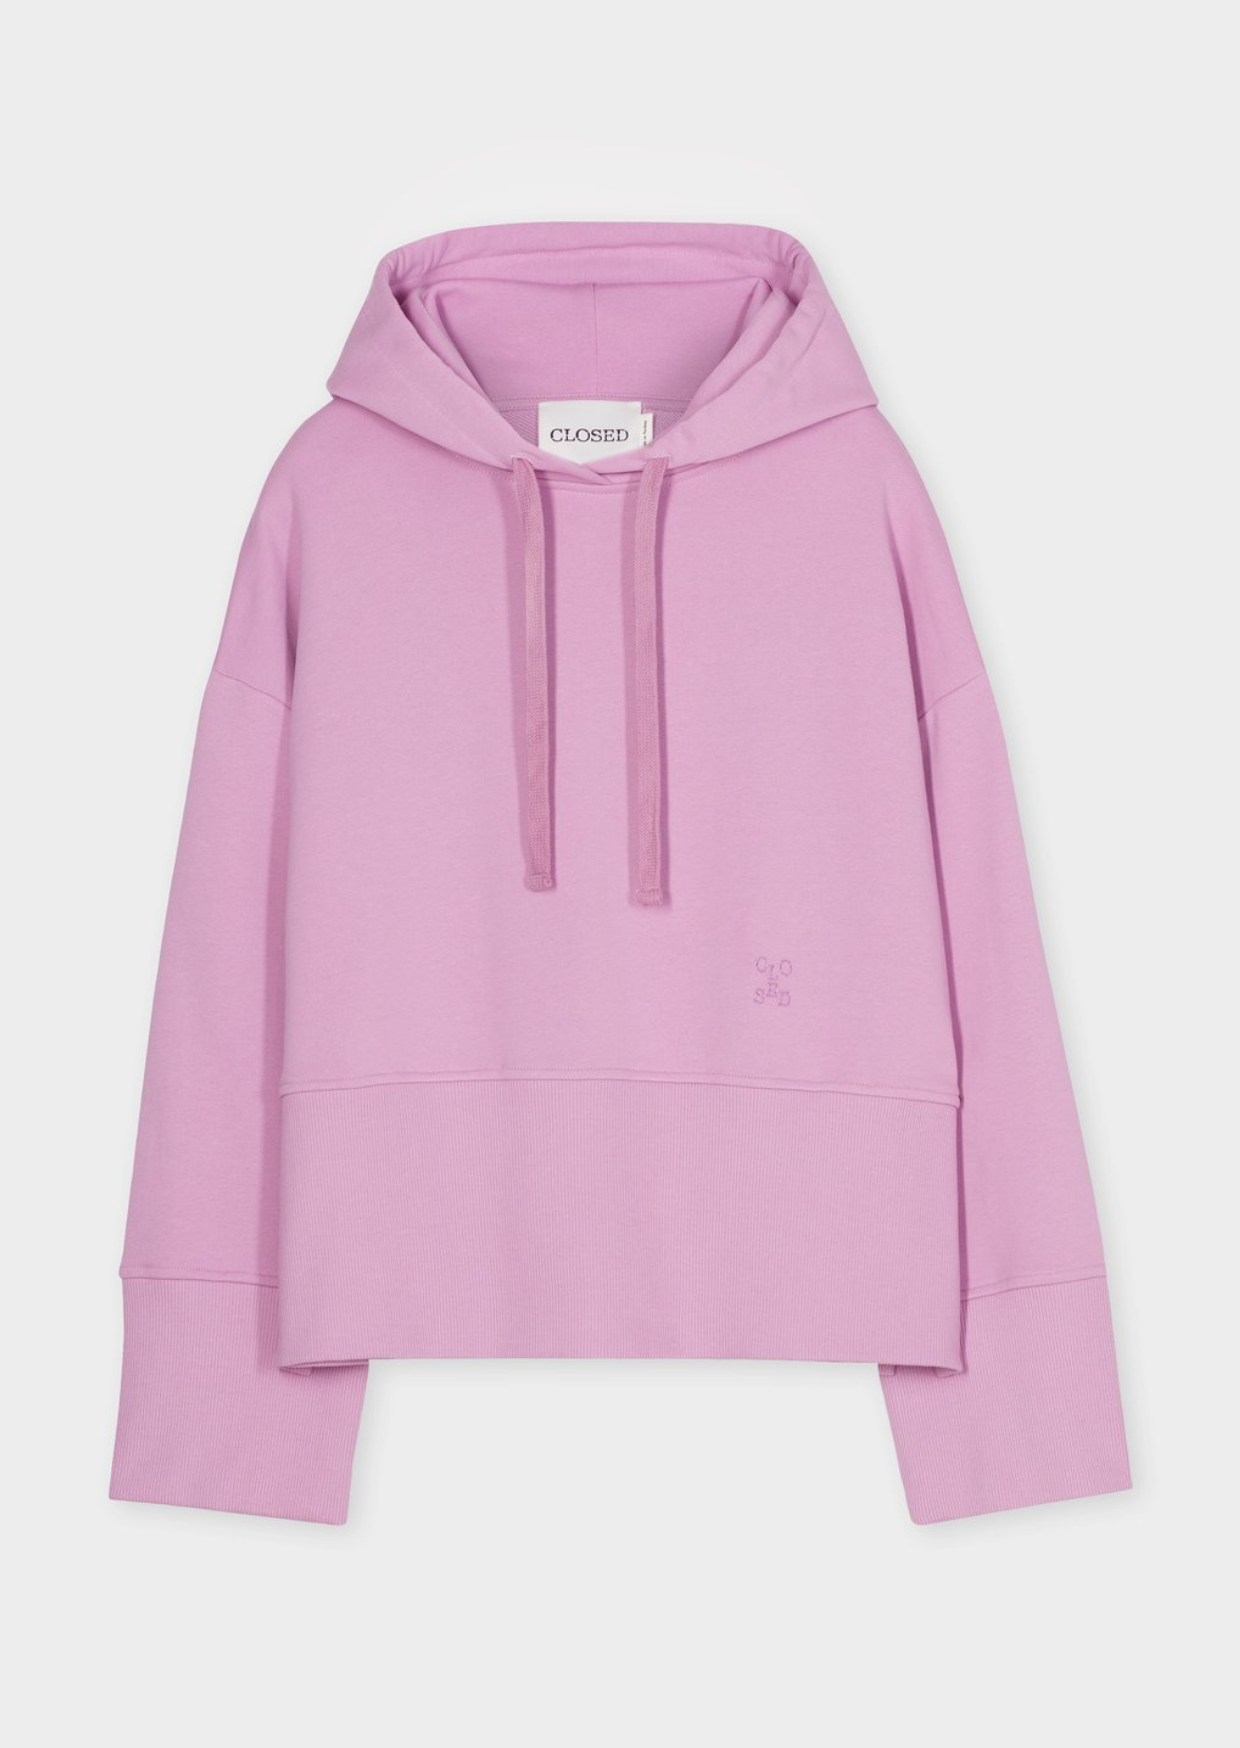 Closed Cropped hoody pink poeny 